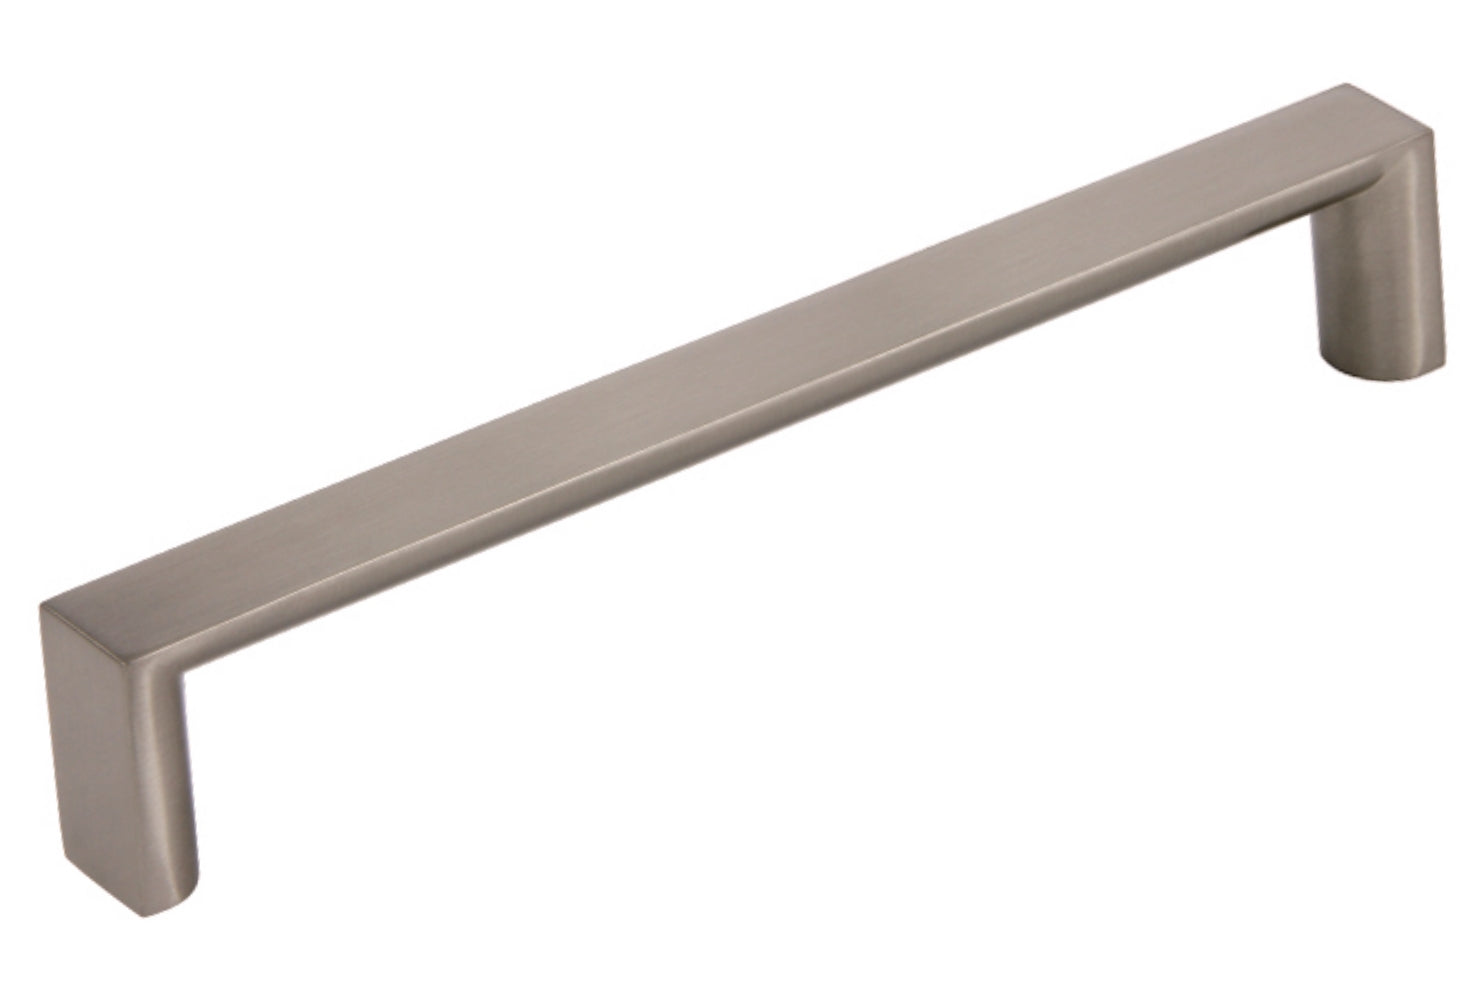 Silverline P5192 - Zinc Alloy Bridge Square Handle Bold Heavy Cabinet Pull Appliance Handle Various Sizes and Finishes